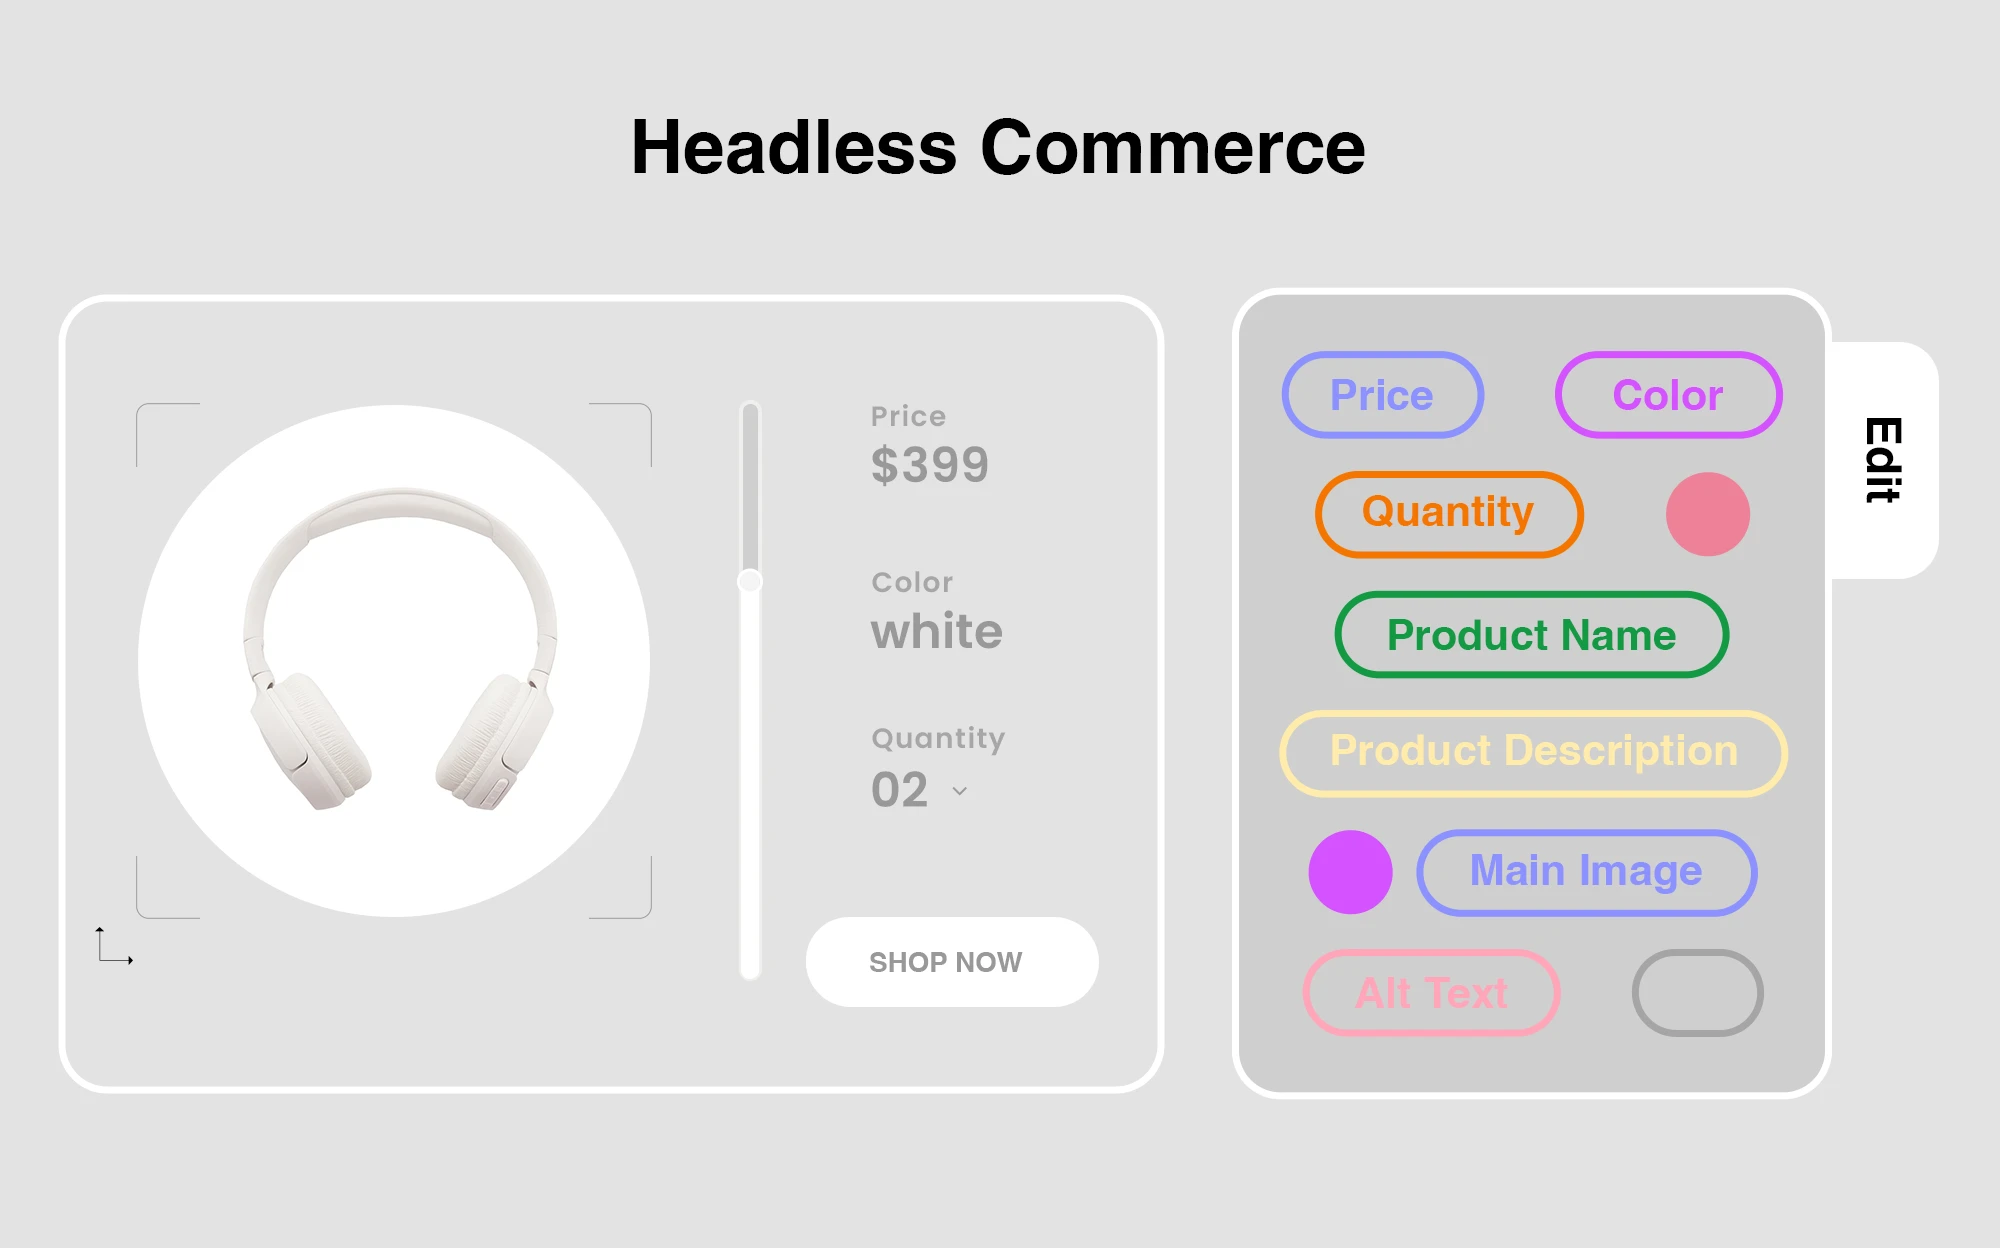 Components of a Headless Commerce